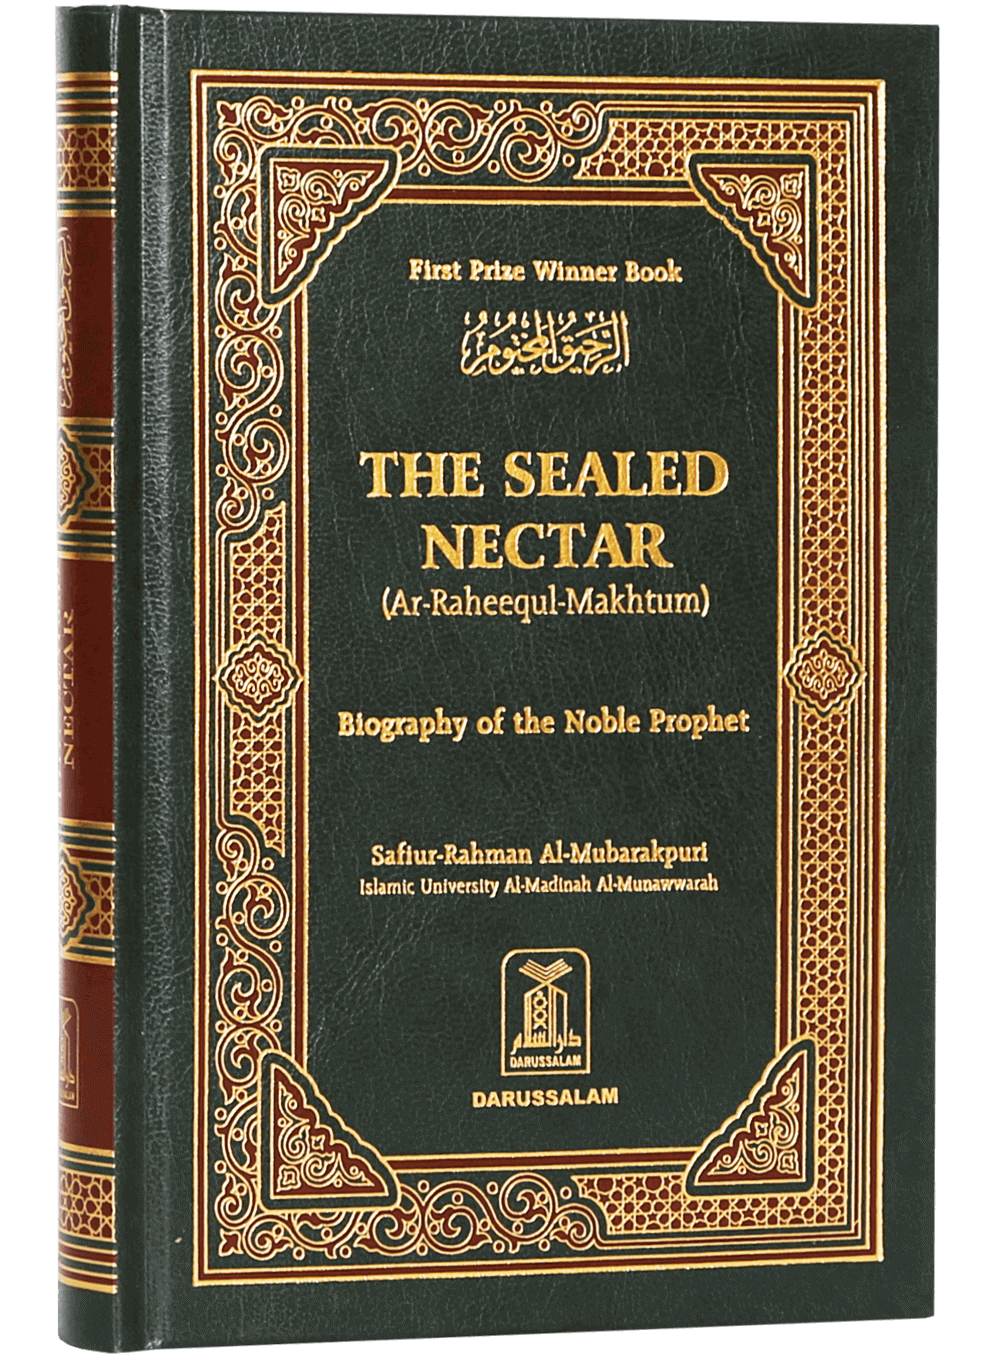 The sealed nectar black cover Darussalam Pakistan